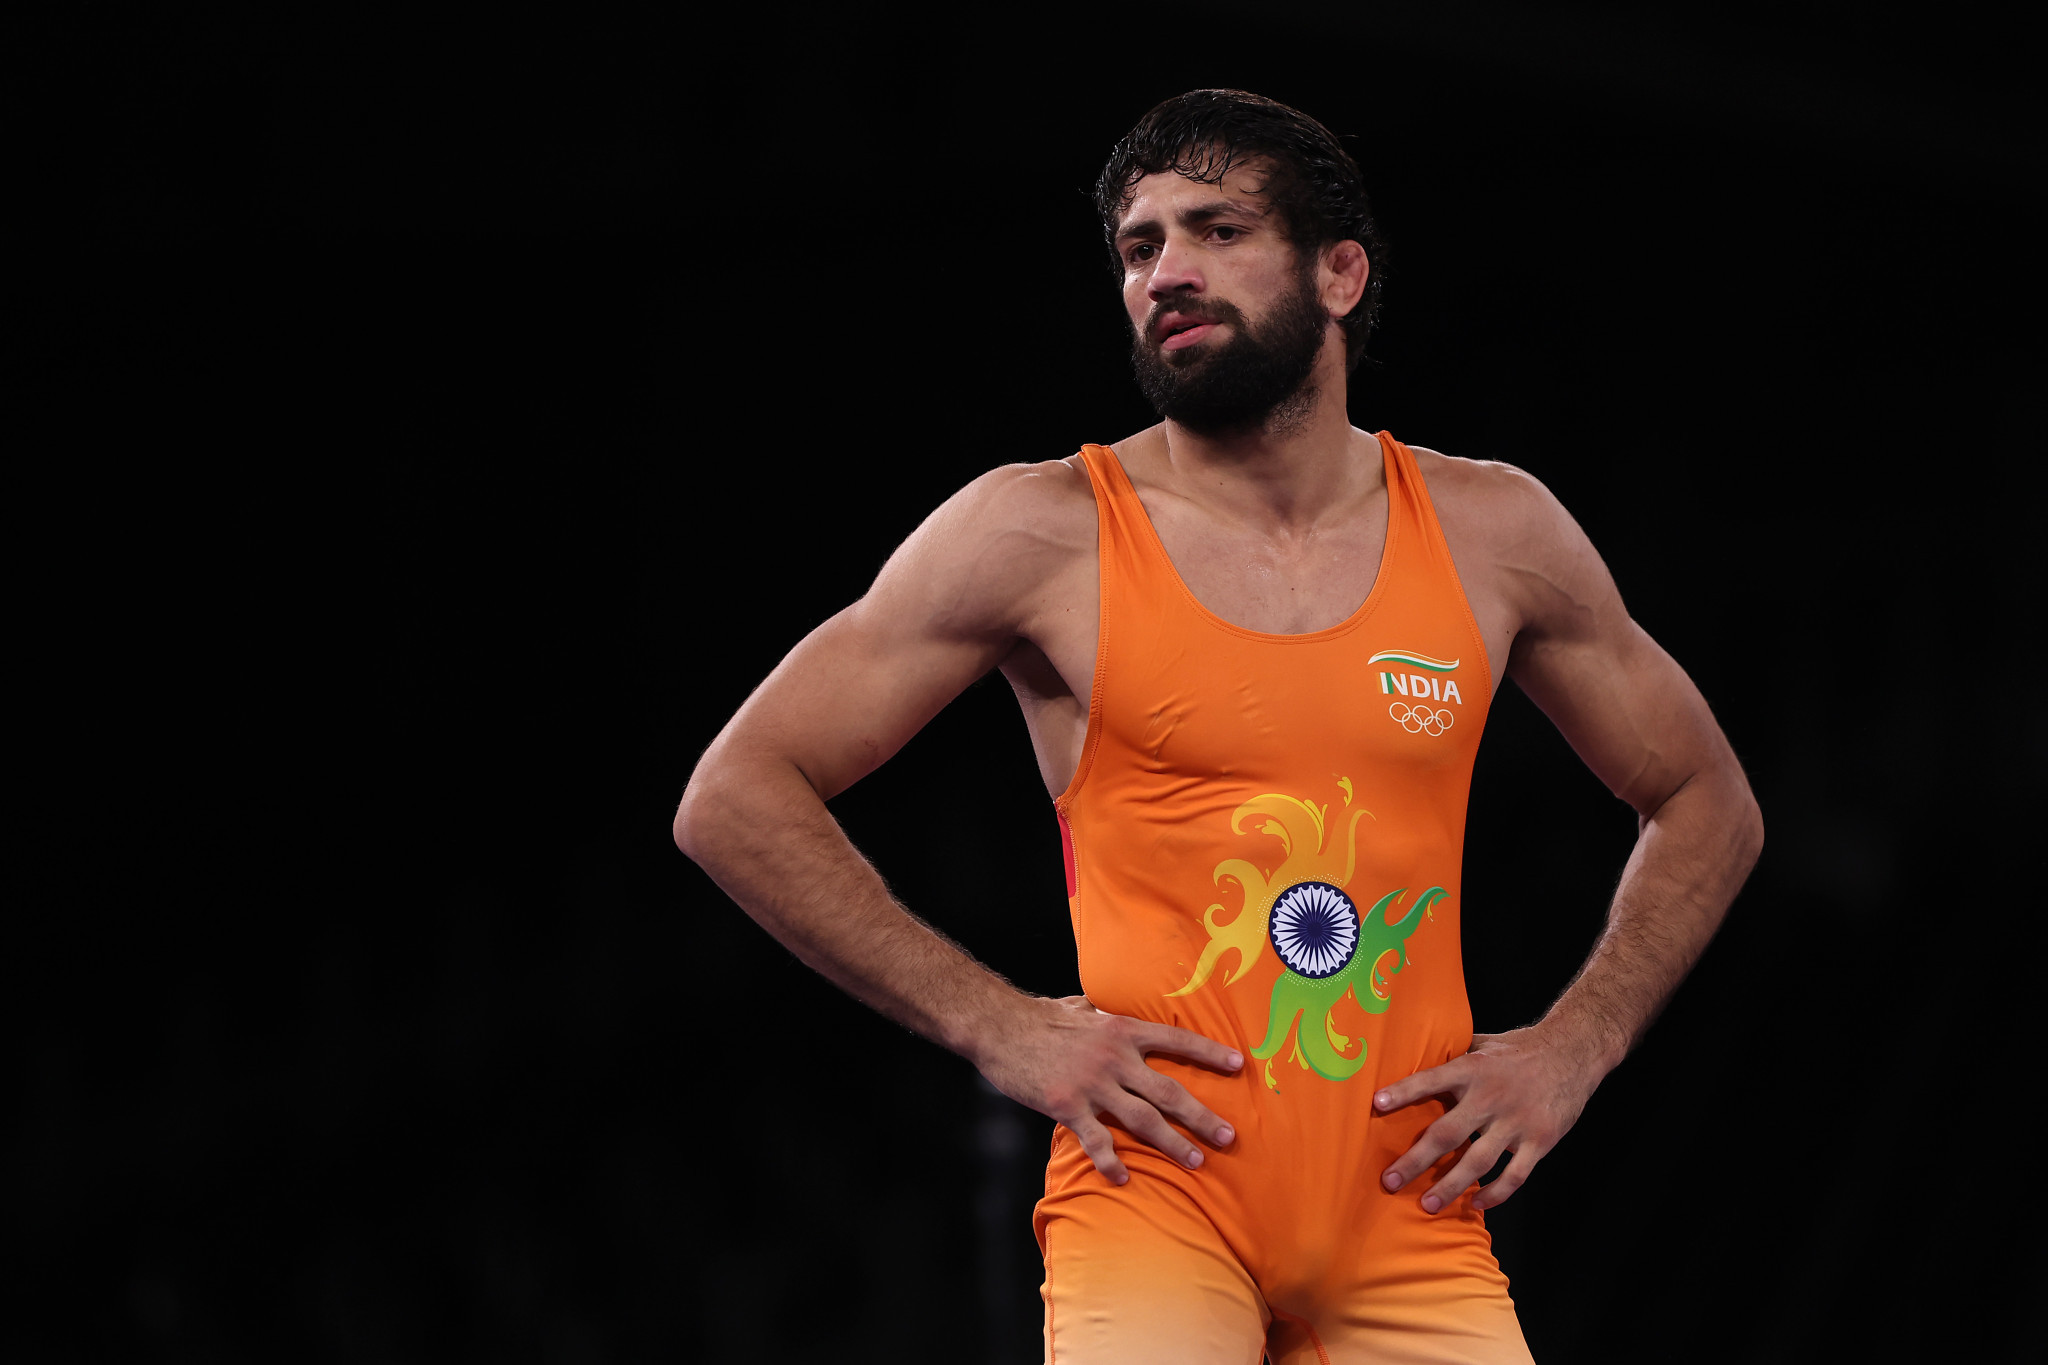 Wrestling Federation of India: Dates for Olympic trials create more confusion